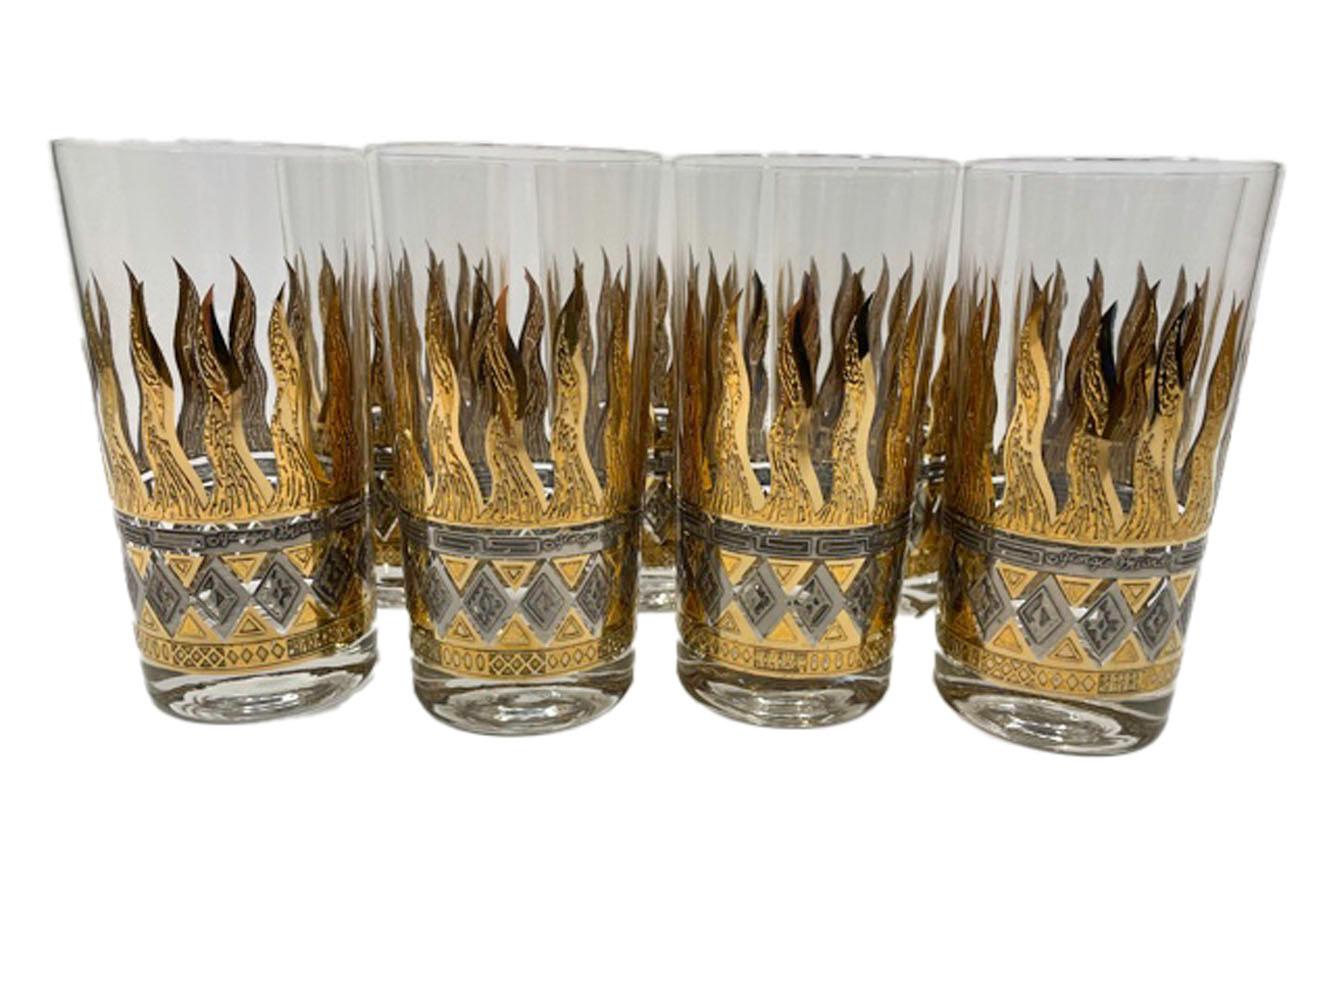 Set of 8 Mid-Century Modern highball glasses designed by Georges Briard having a band of raised gold flames rising from raised bands of gold and silver impressed with geometric Art Deco inspired motifs.